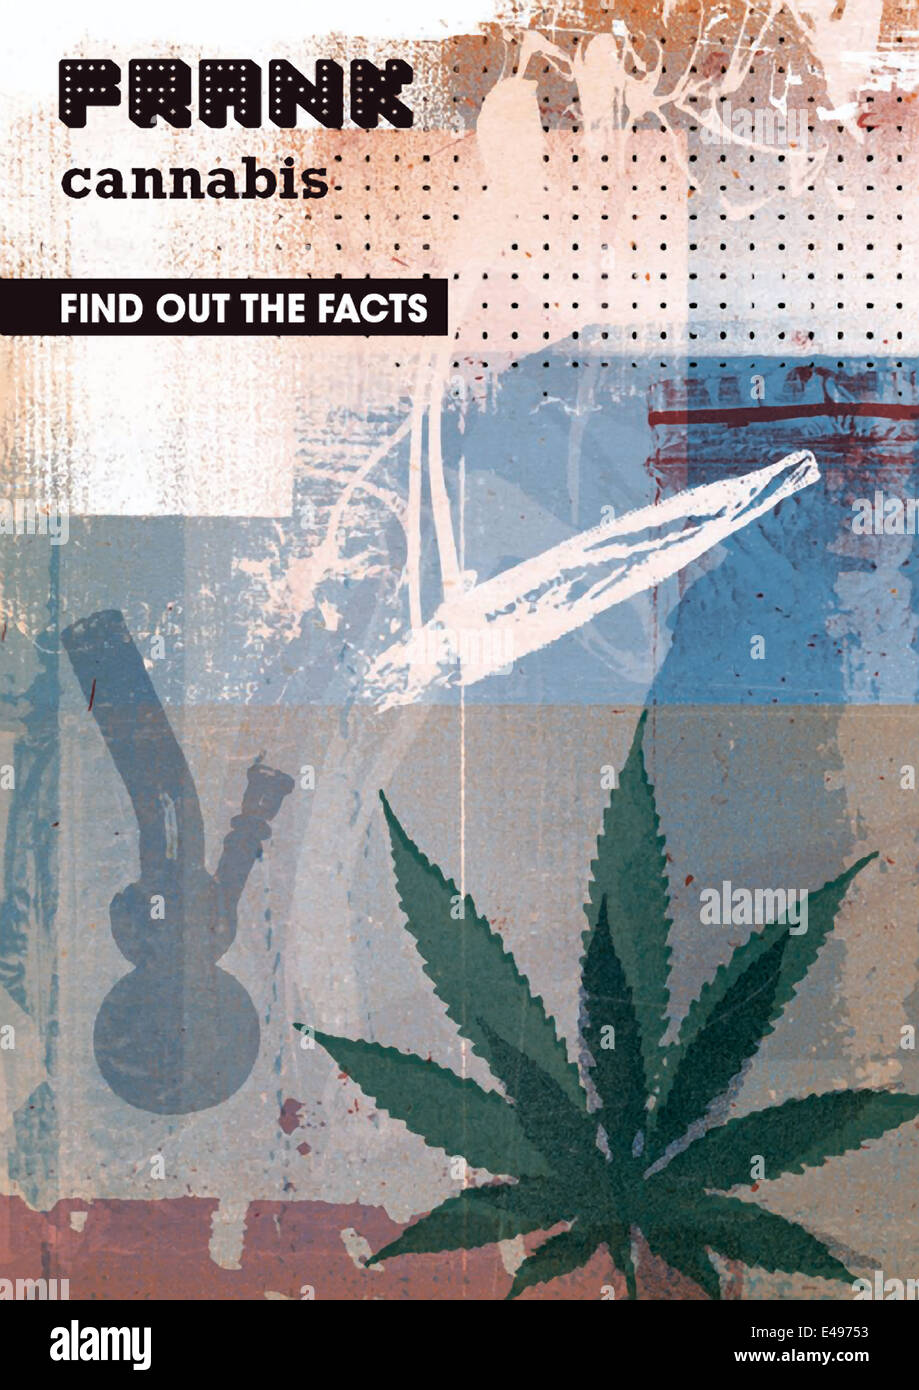 Drug information awareness raising poster released in January 2012 as part of the FRANK anti-drug campaign in the United Kingdom. Cannabis 'Find out the Facts' leaflet about the effects, dangers and signs of use and dependency. Stock Photo